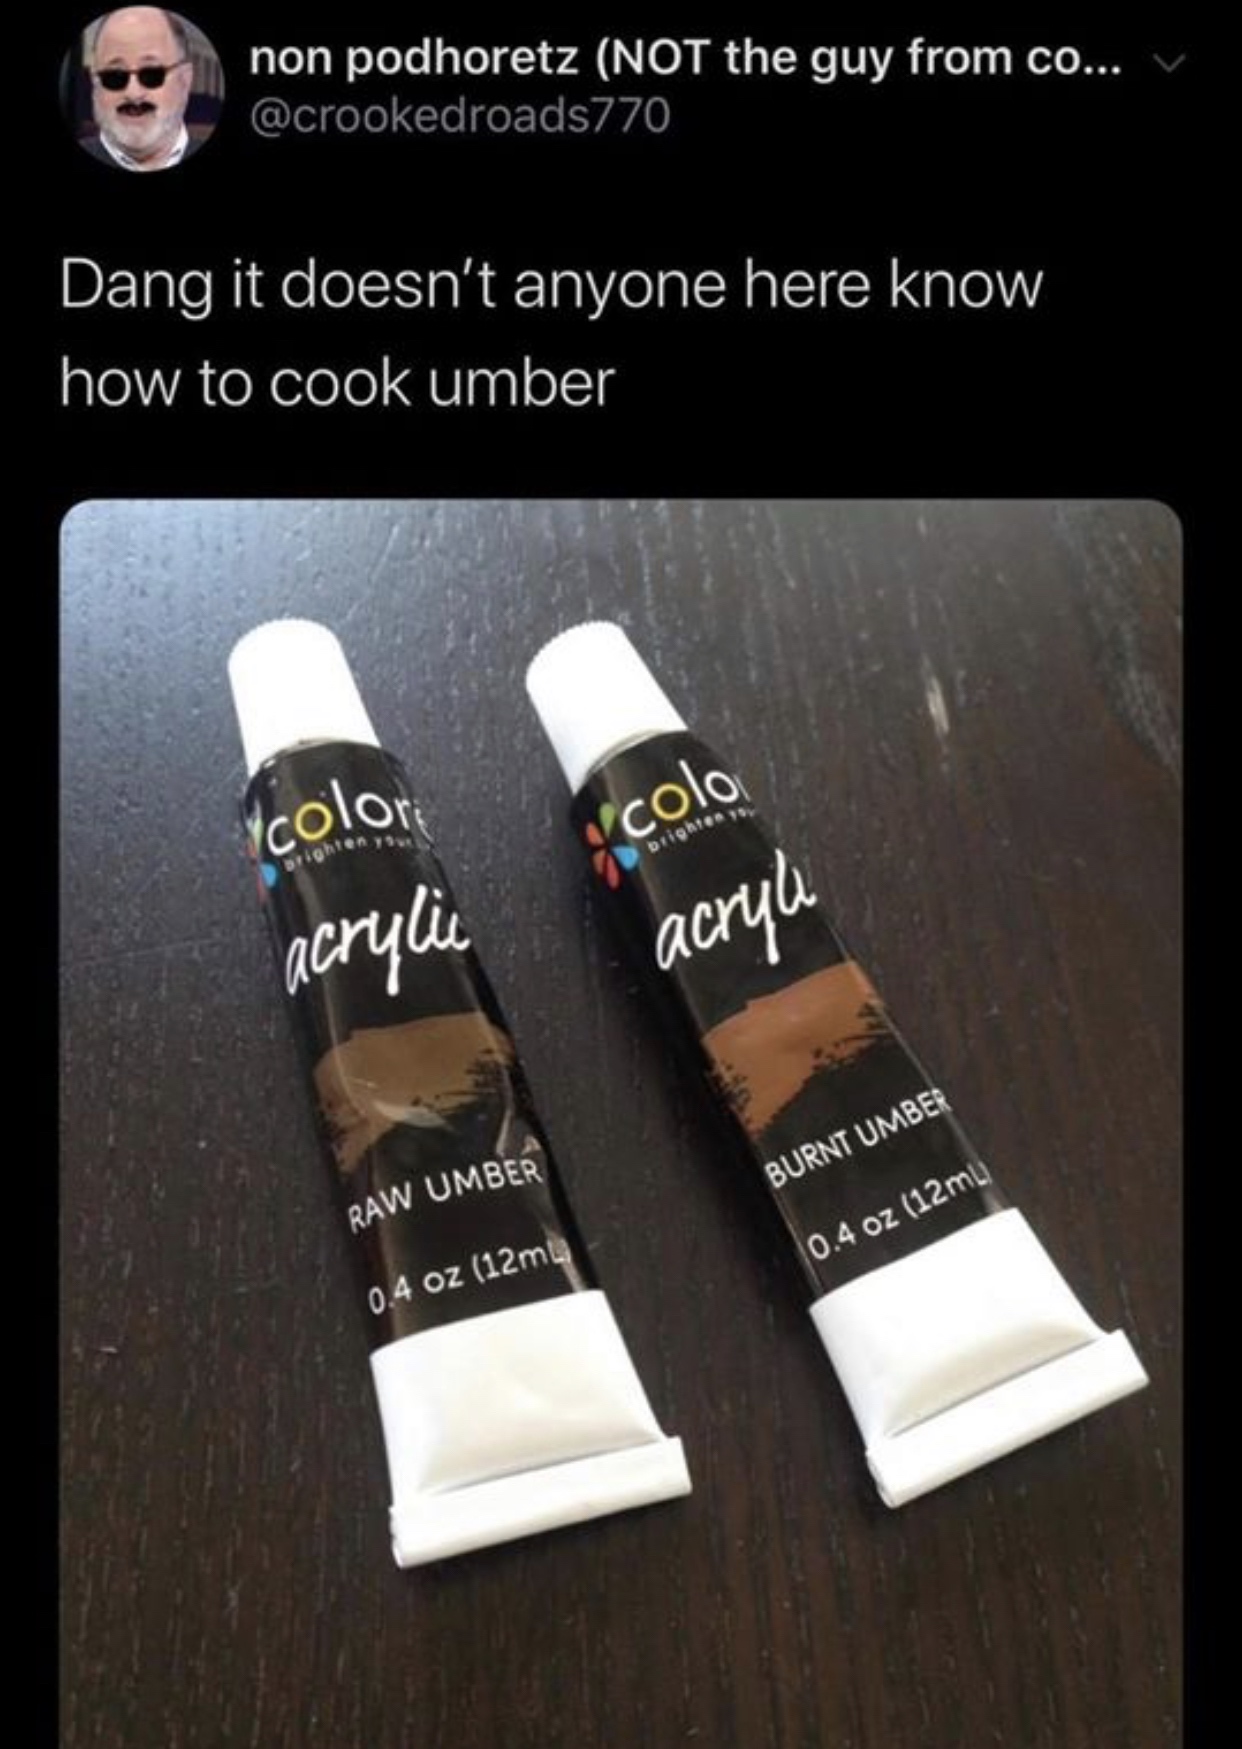 non podhoretz Not the guy from co... V Dang it doesn't anyone here know how to cook umber ycolor acrylic colo acryli Burnt Umber Raw Umber 0.4 oz 12mL 0.4 oz 12mu